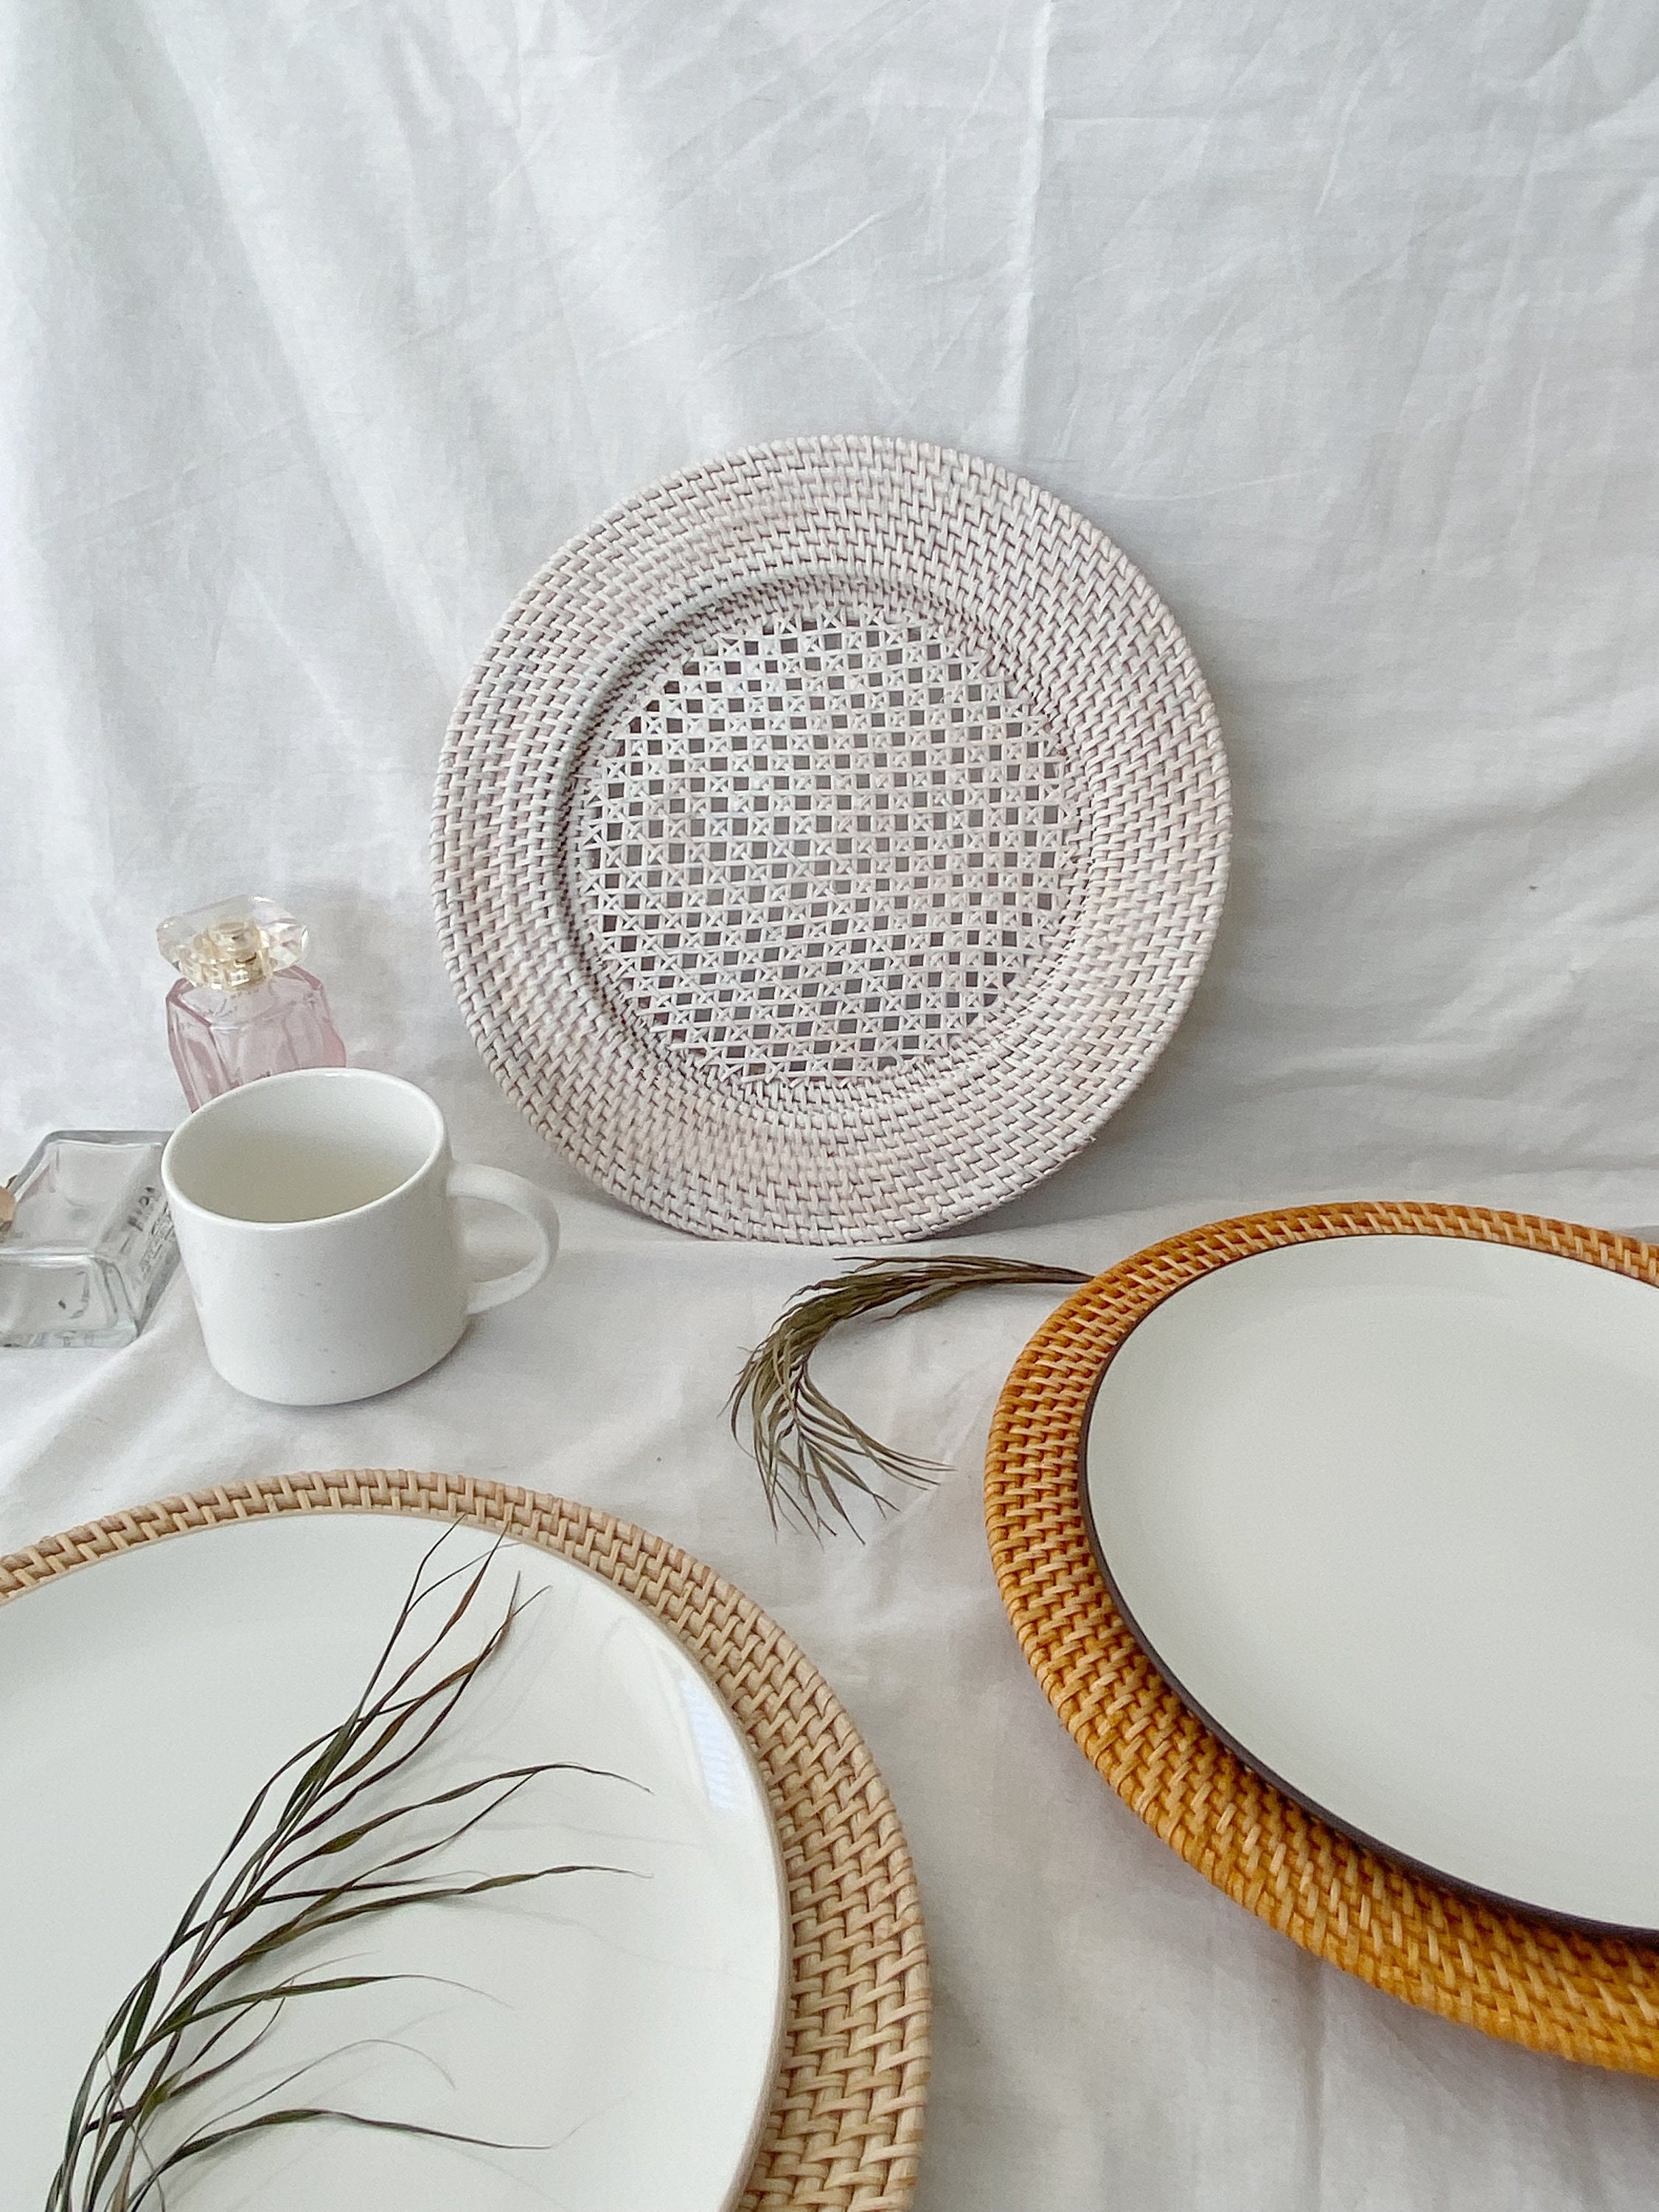 Dress Your Table Tableware Vintage Set of 4 Woven Rattan Teal Charger Plates Dining Placemats Table Design Place Setting